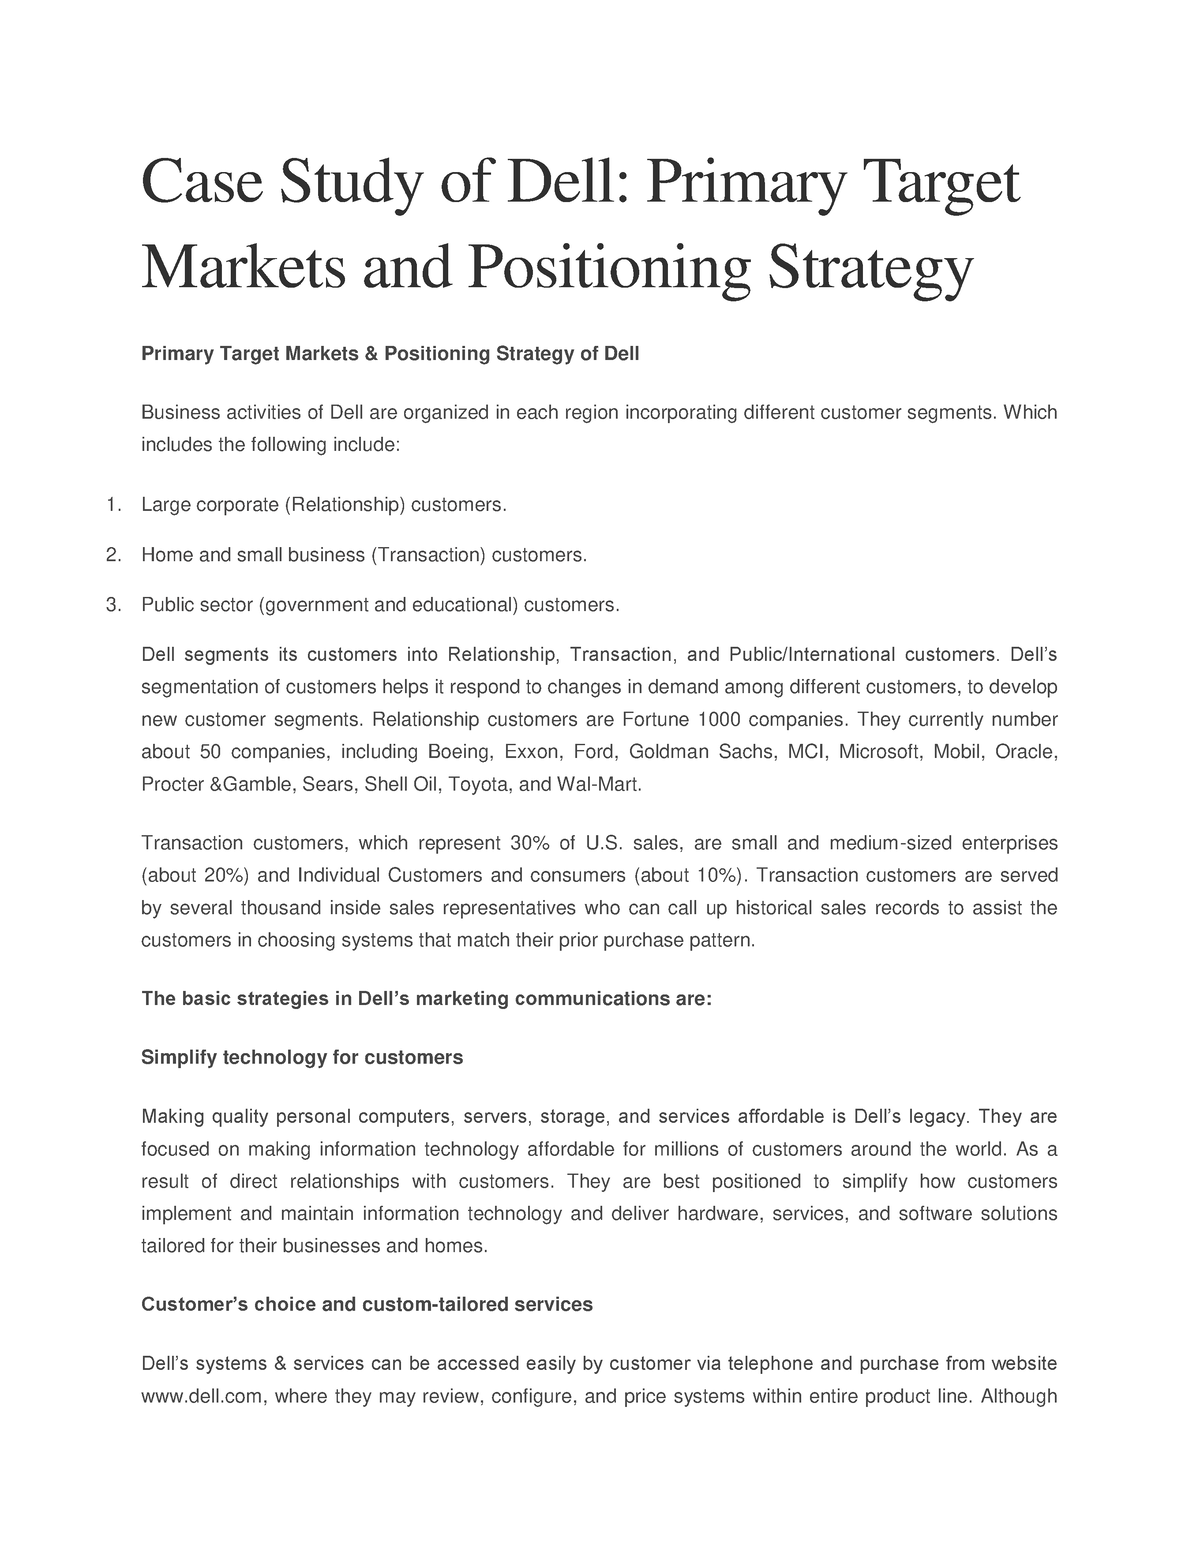 case study of dell in meeting the market competitive challenges